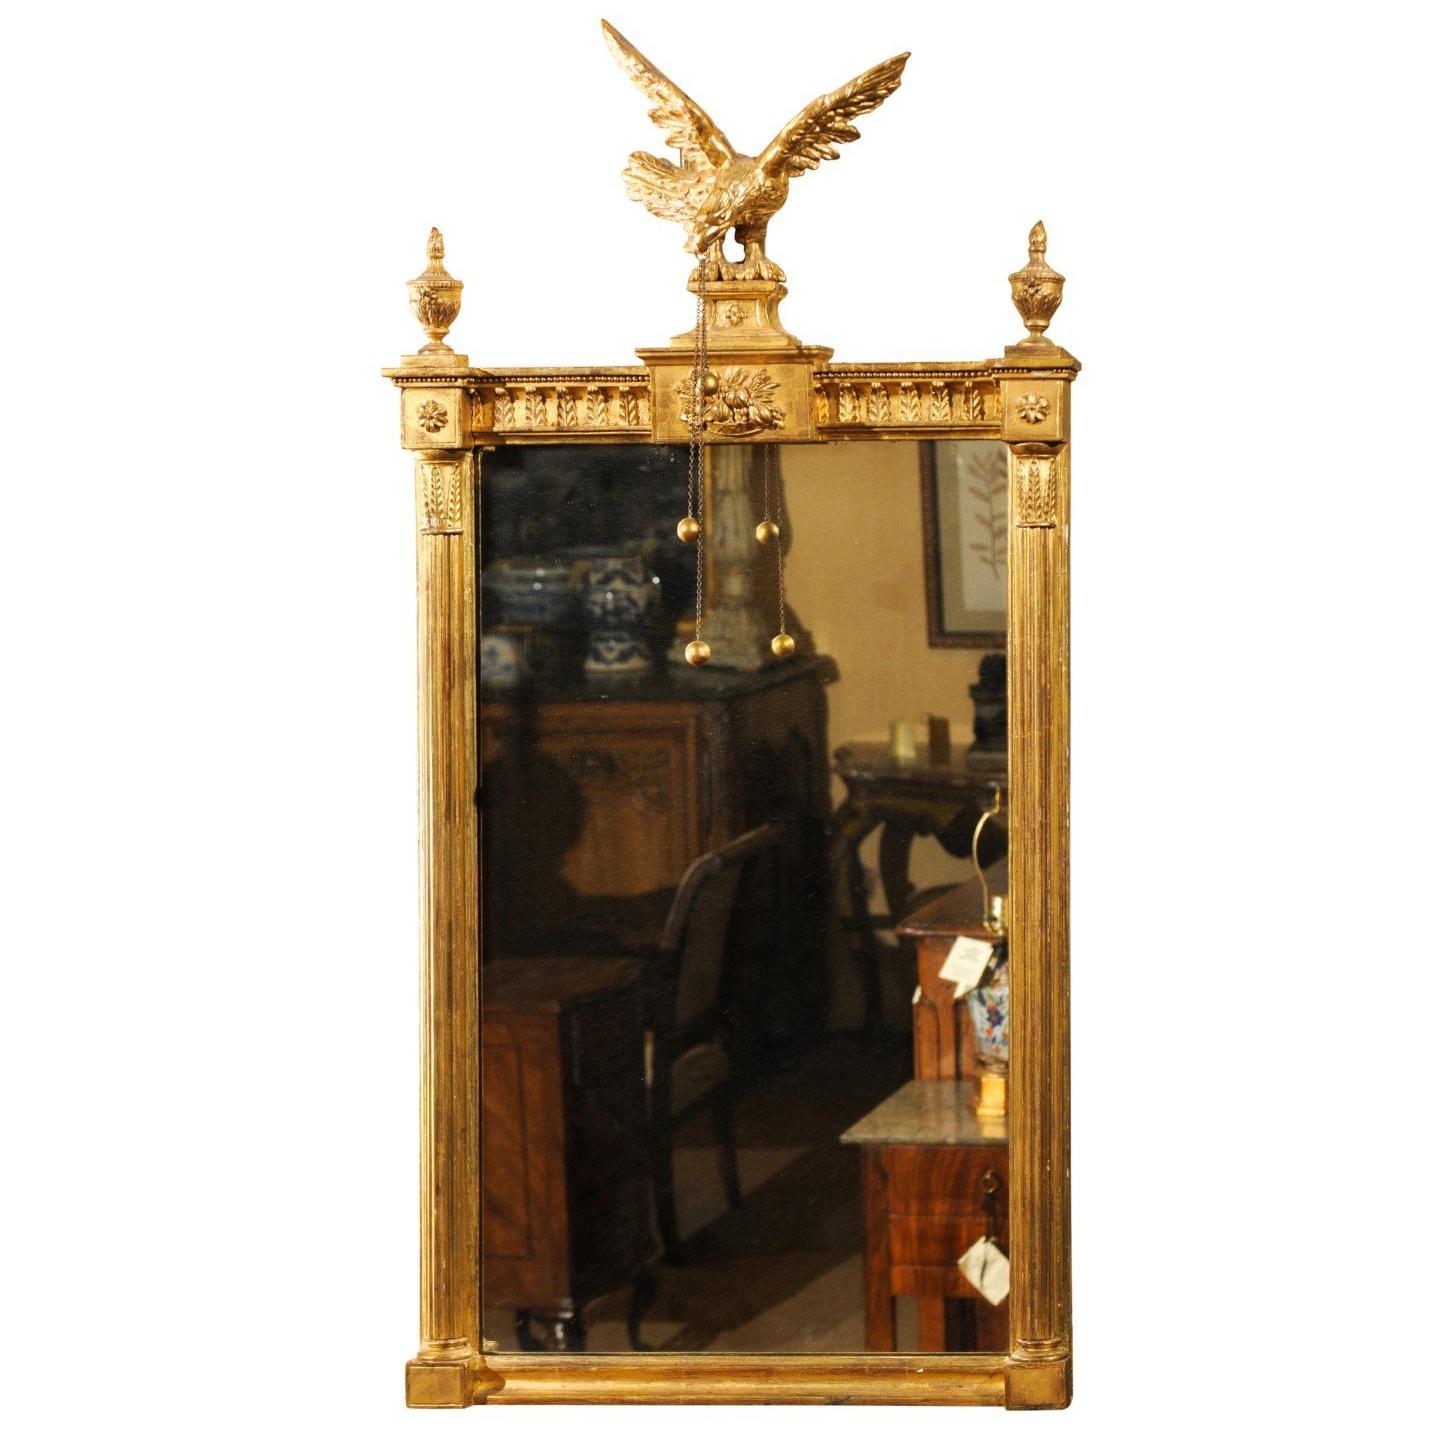 Early 19th Century Federal Giltwood Mirror with Eagle Crest